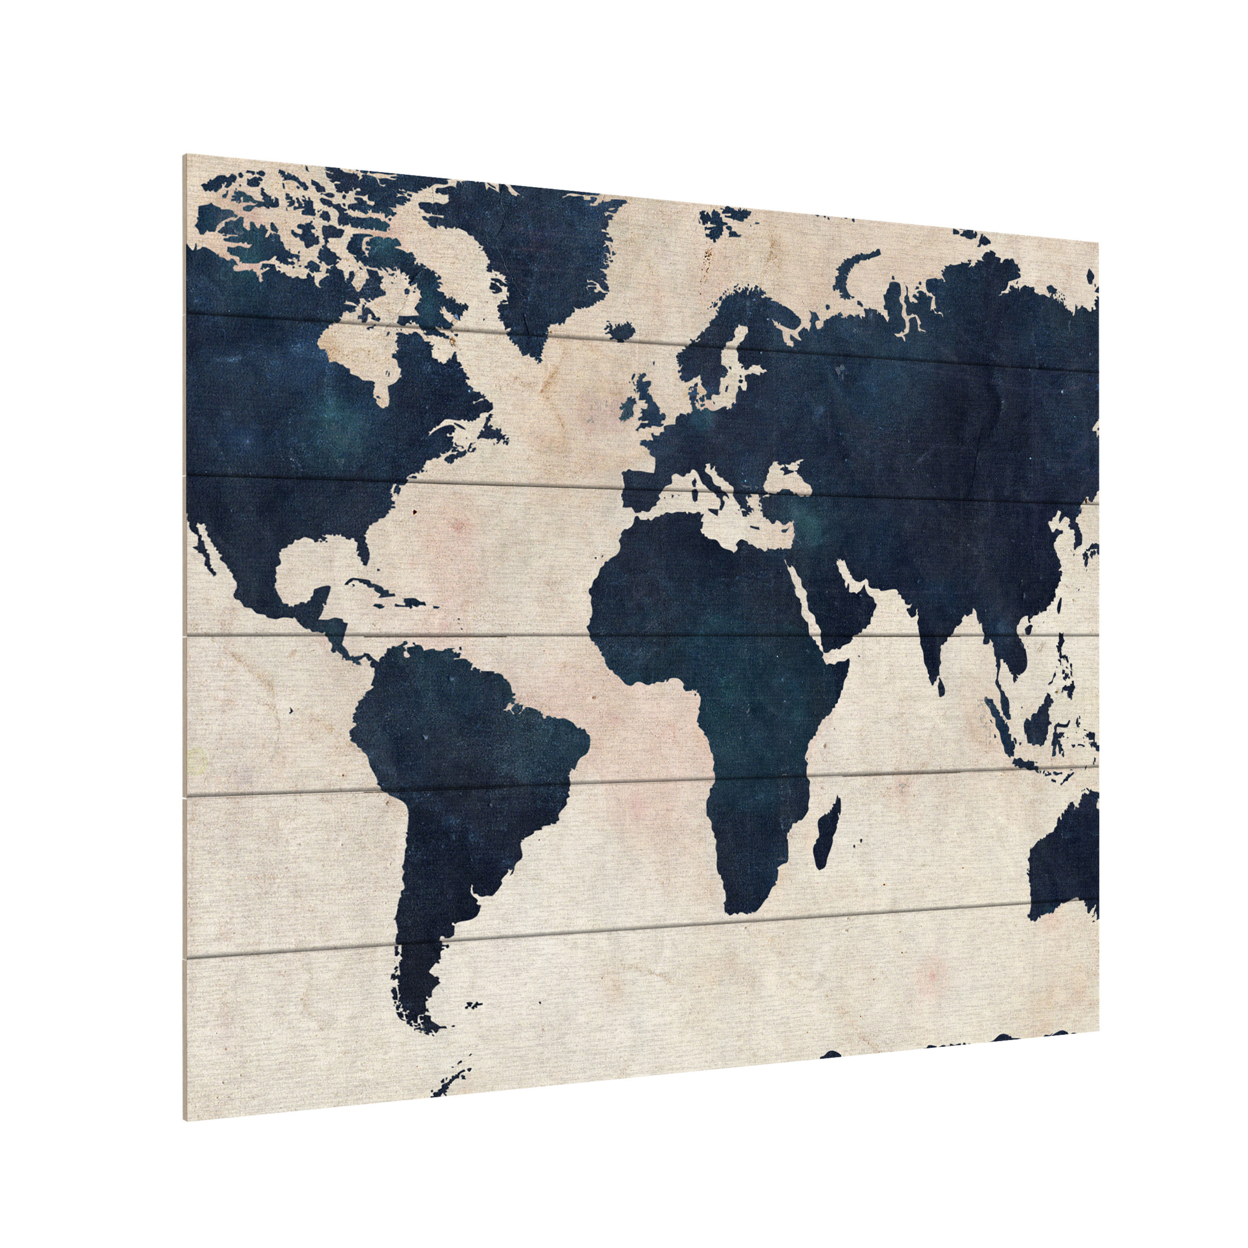 Wooden Slat Art 18 X 22 Inches Titled World Map -Navy Ready To Hang Home Decor Picture